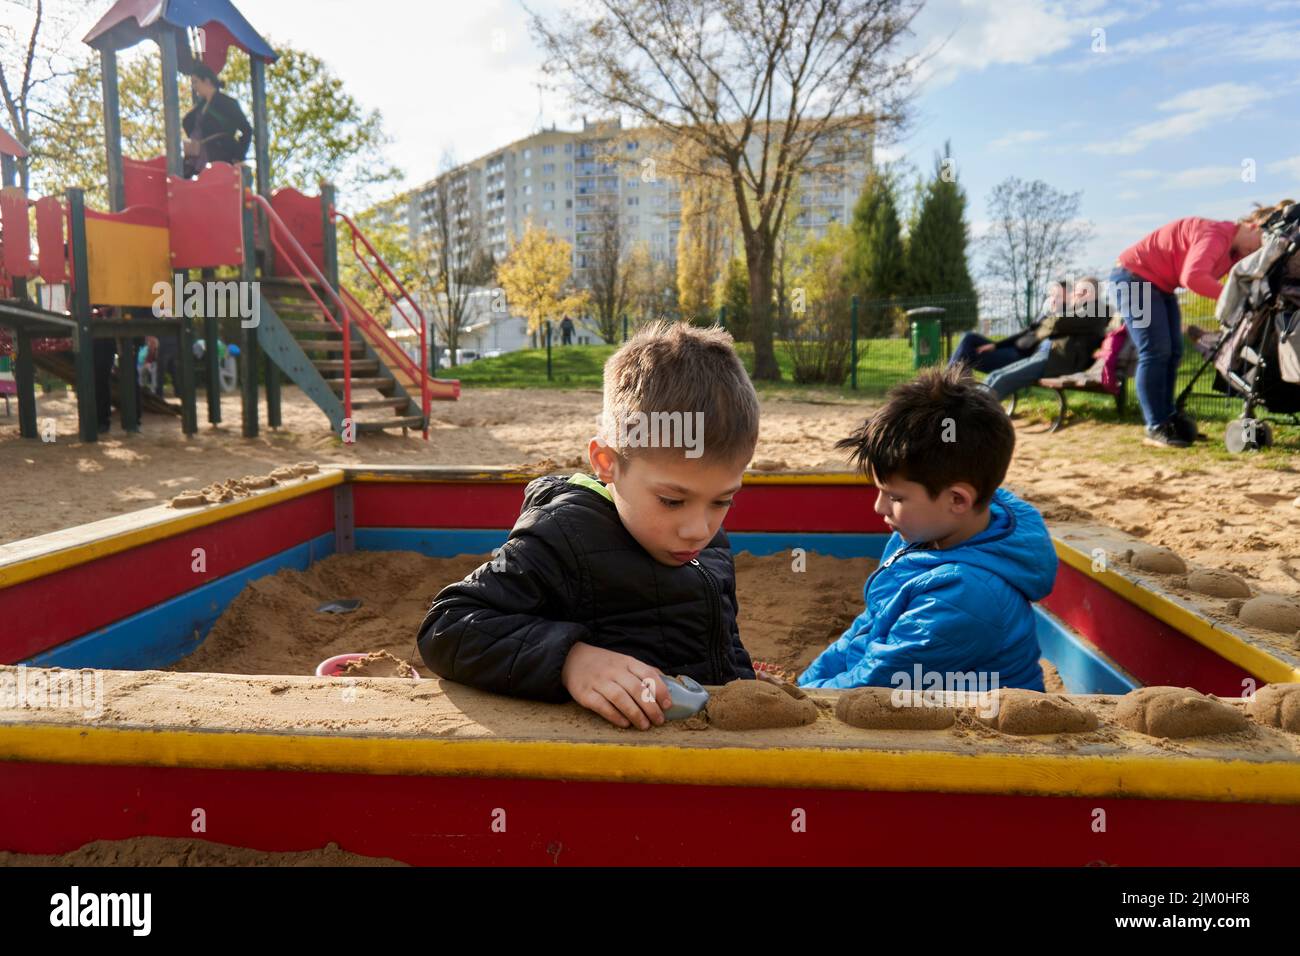 A selective of two young boys playing with plastic toys in a sandpit at a playground Stock Photo